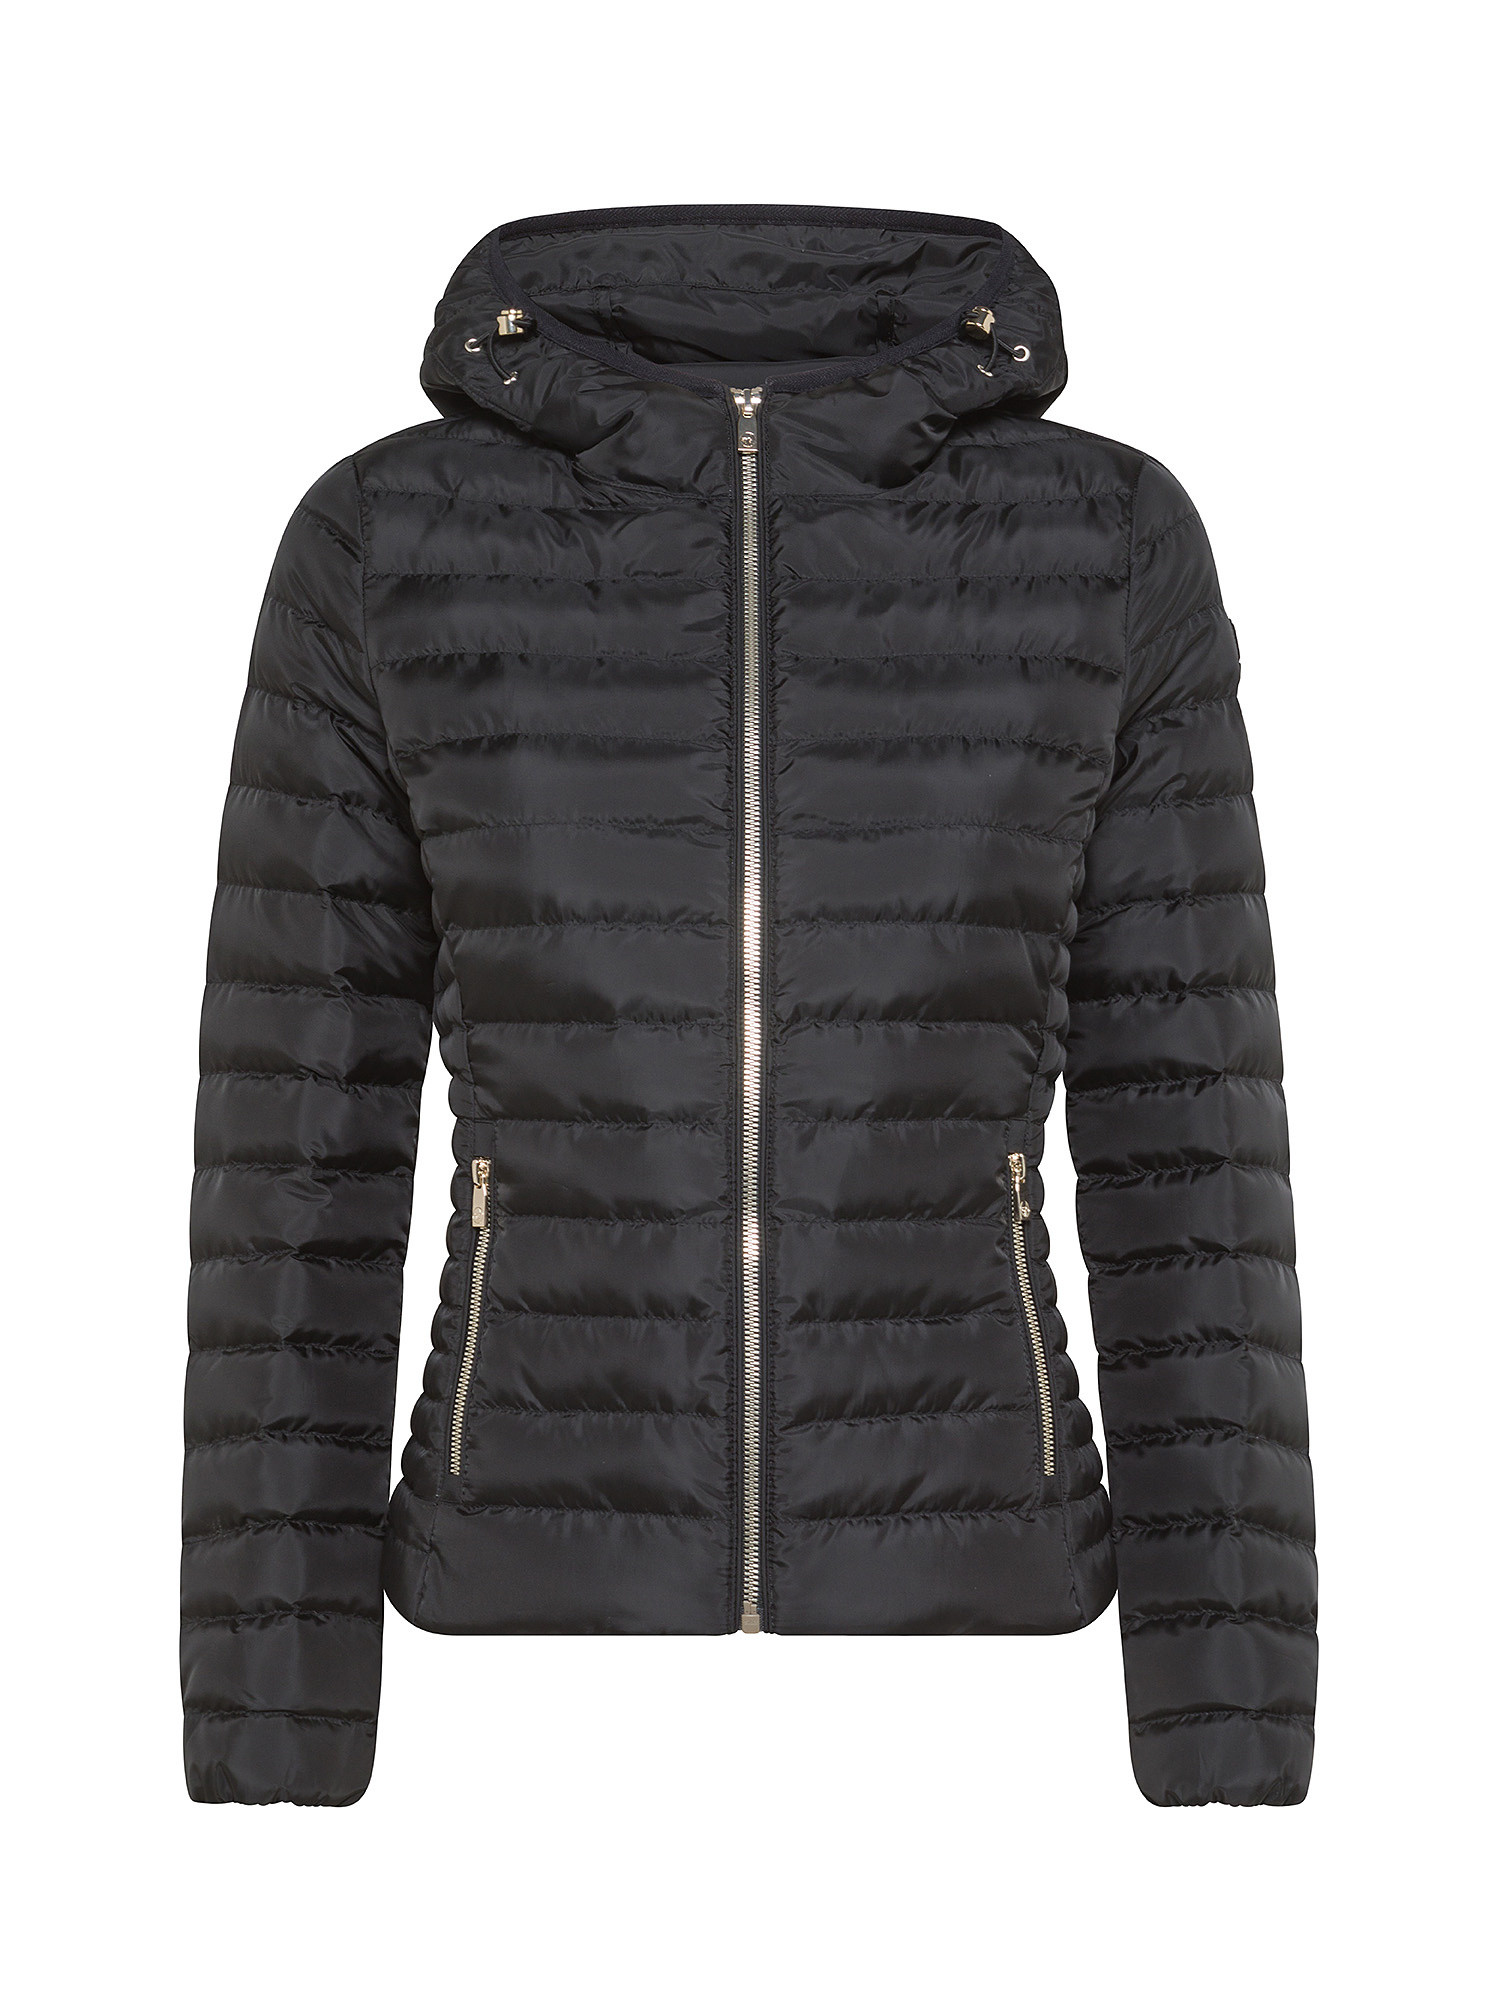 Ciesse Piumini - Carrie down jacket with hood, Black, large image number 0